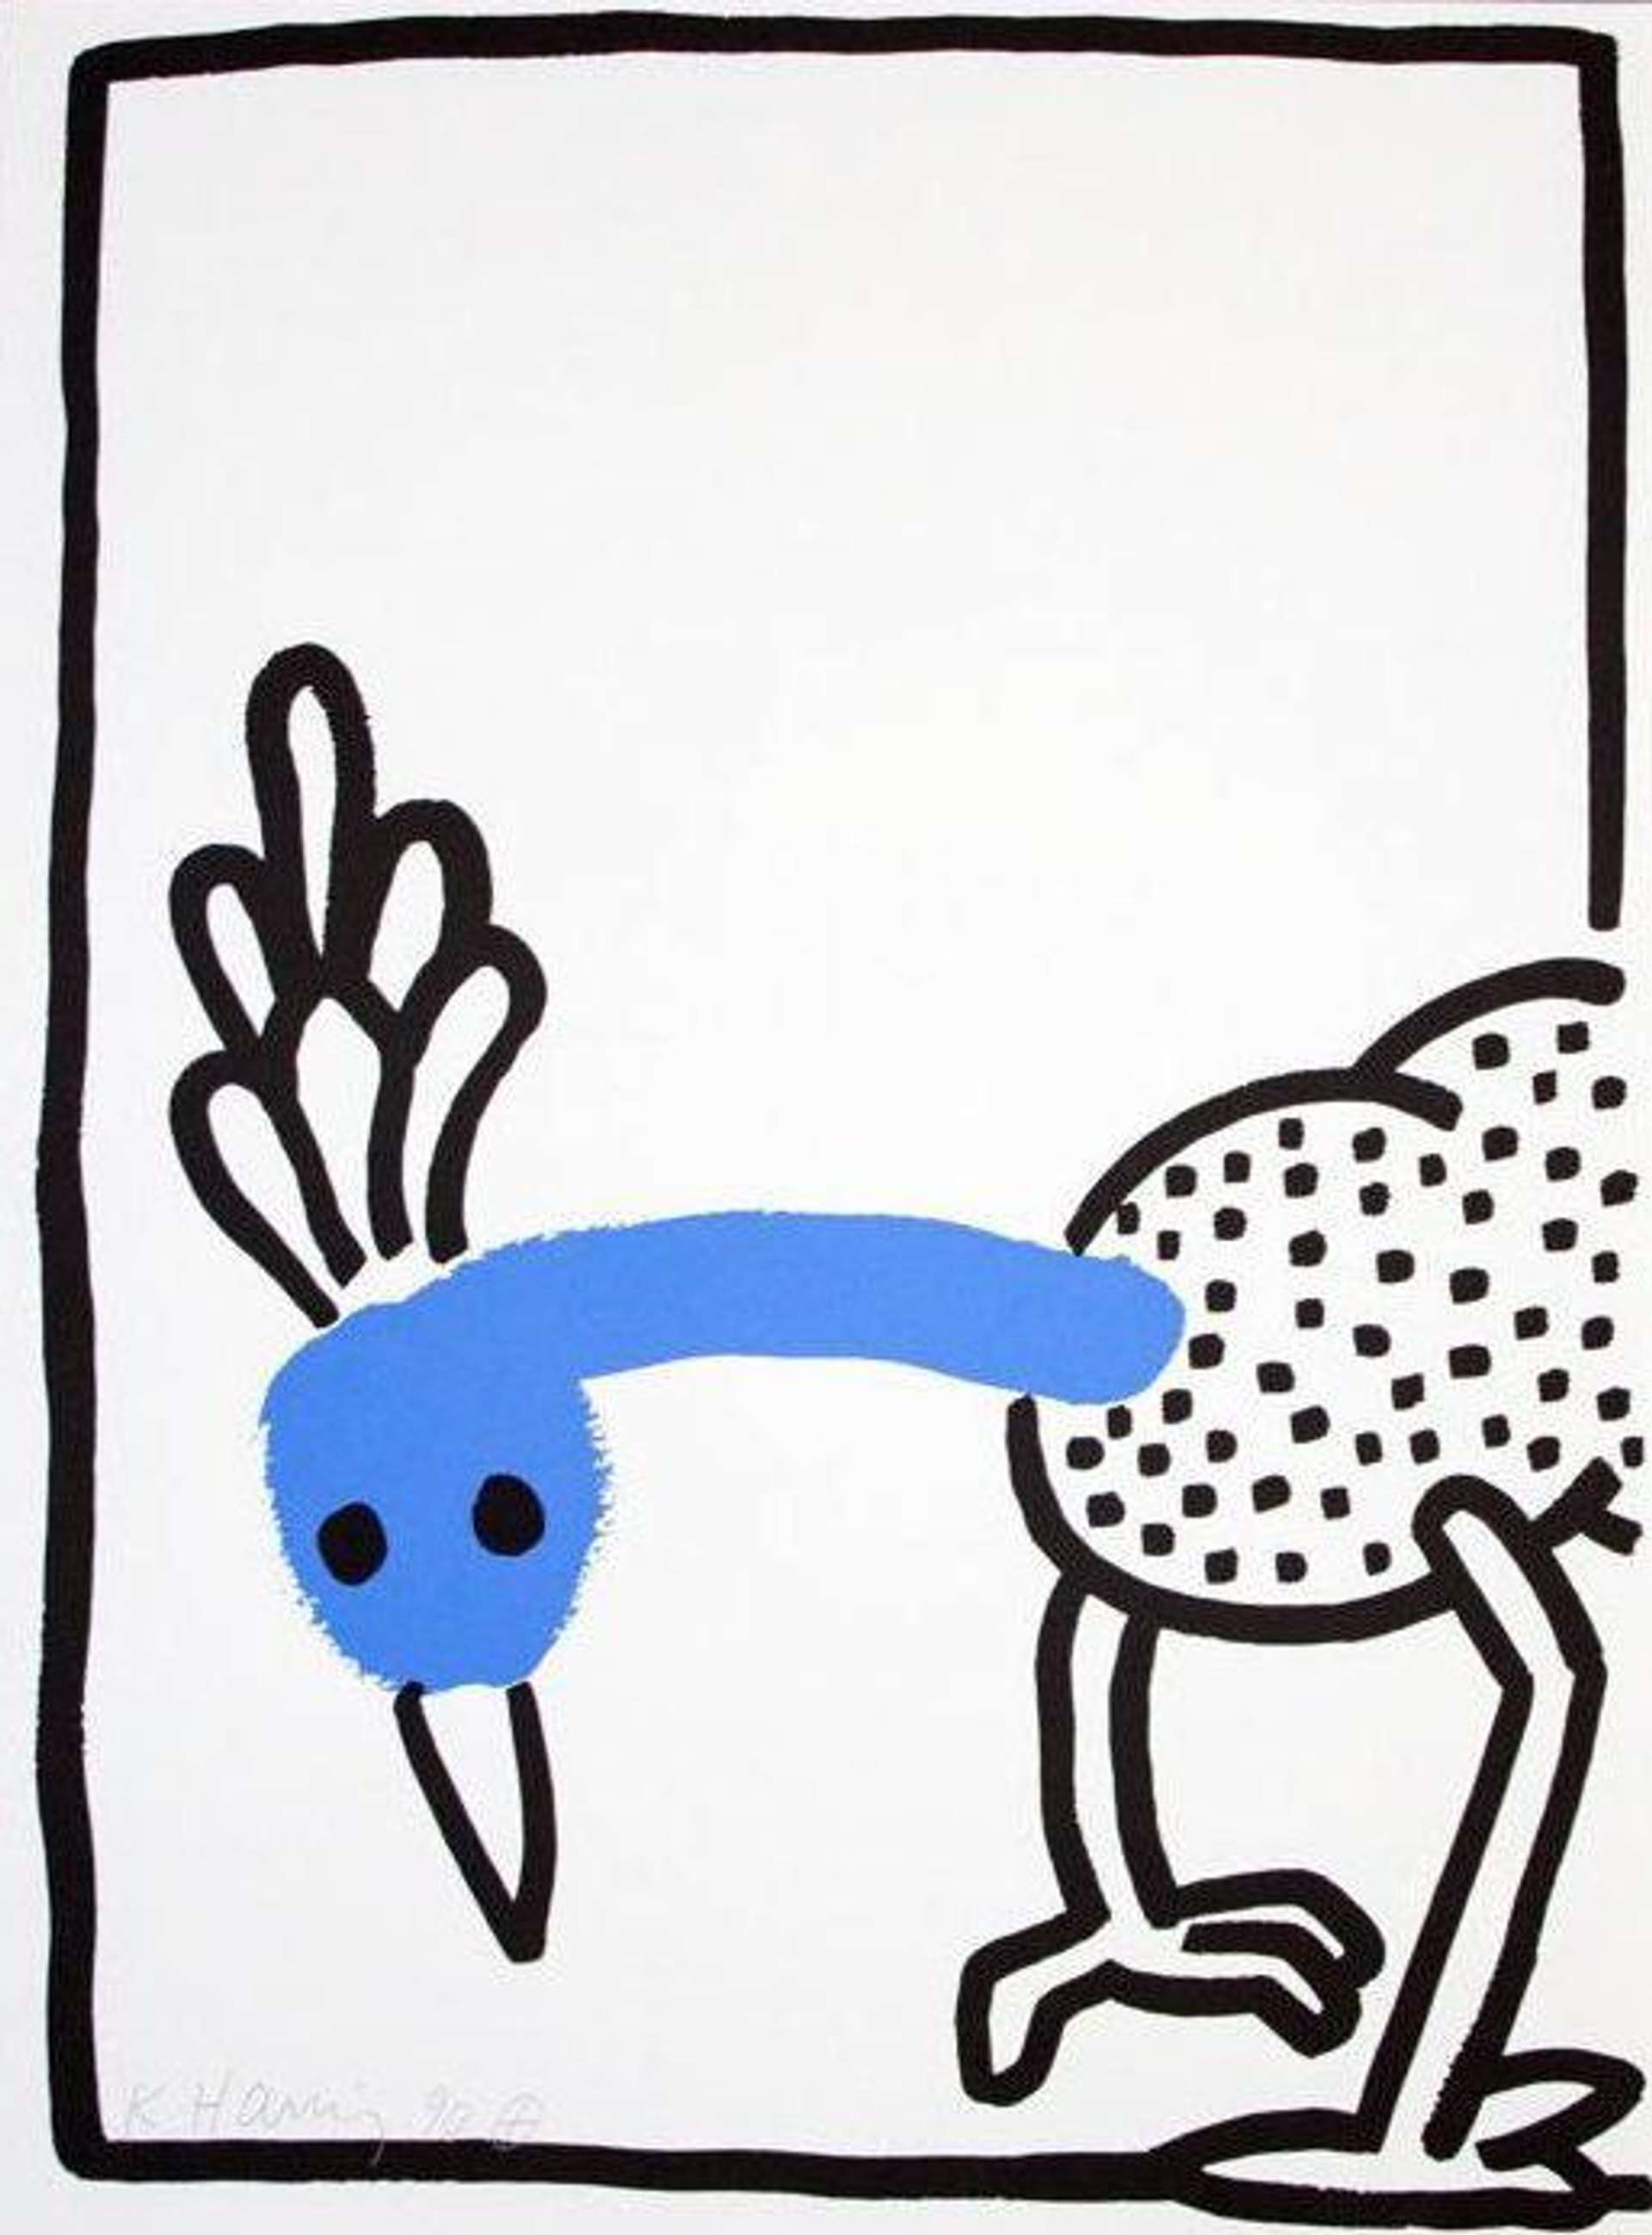 The Story Of Red And Blue 8 - Signed Print by Keith Haring 1989 - MyArtBroker